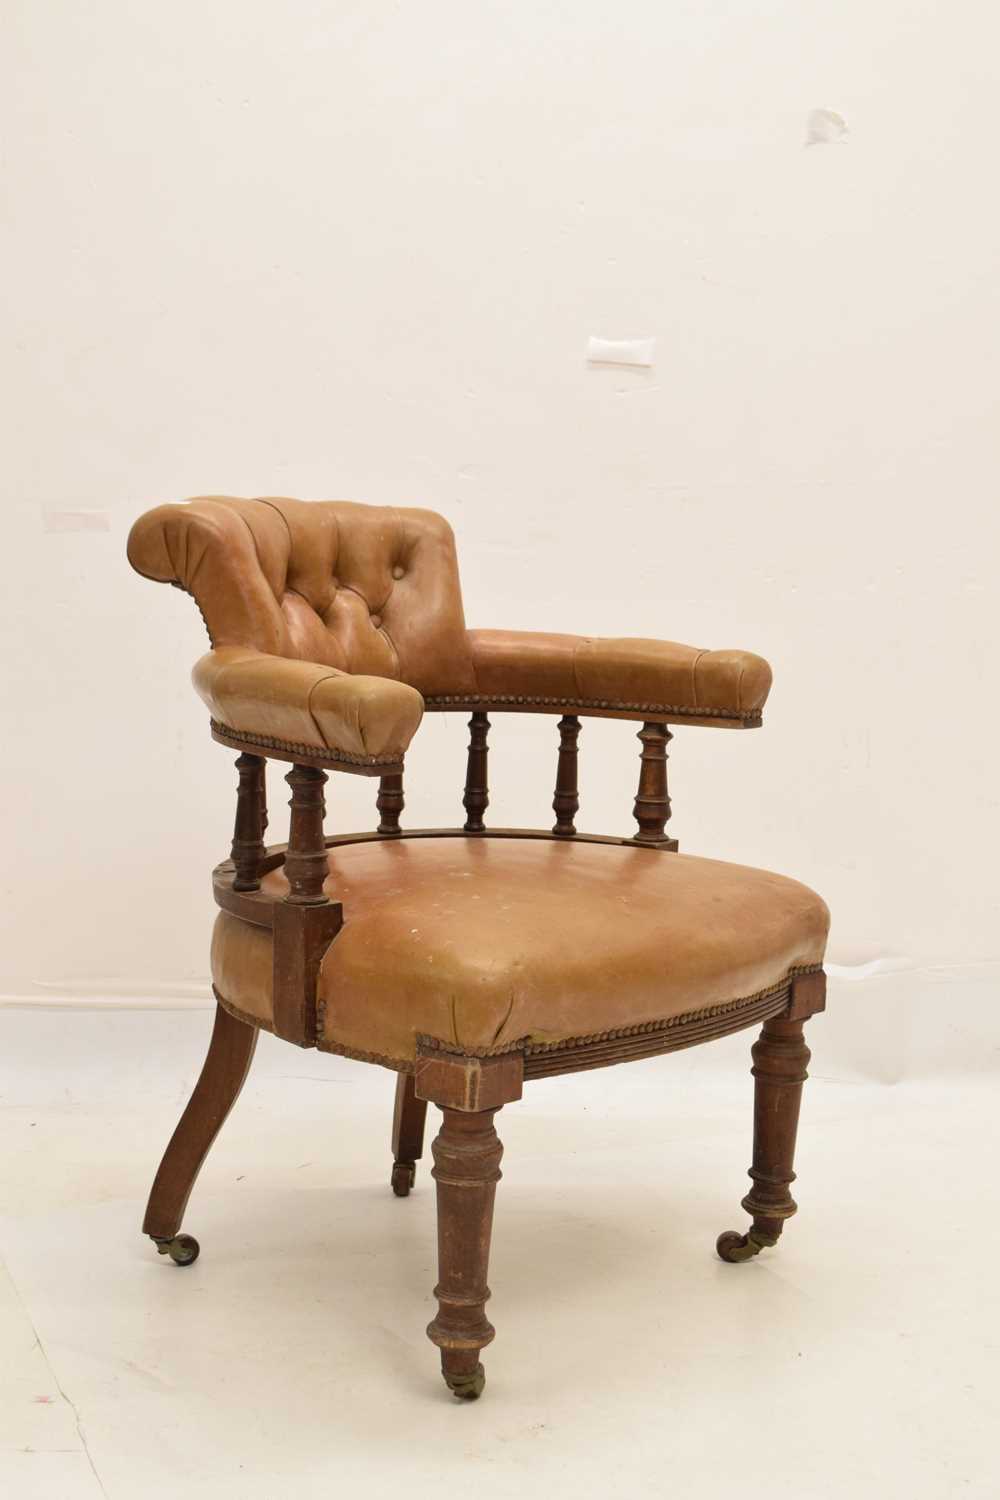 Early 20th century button upholstered smoker's bow-type chair - Image 8 of 8